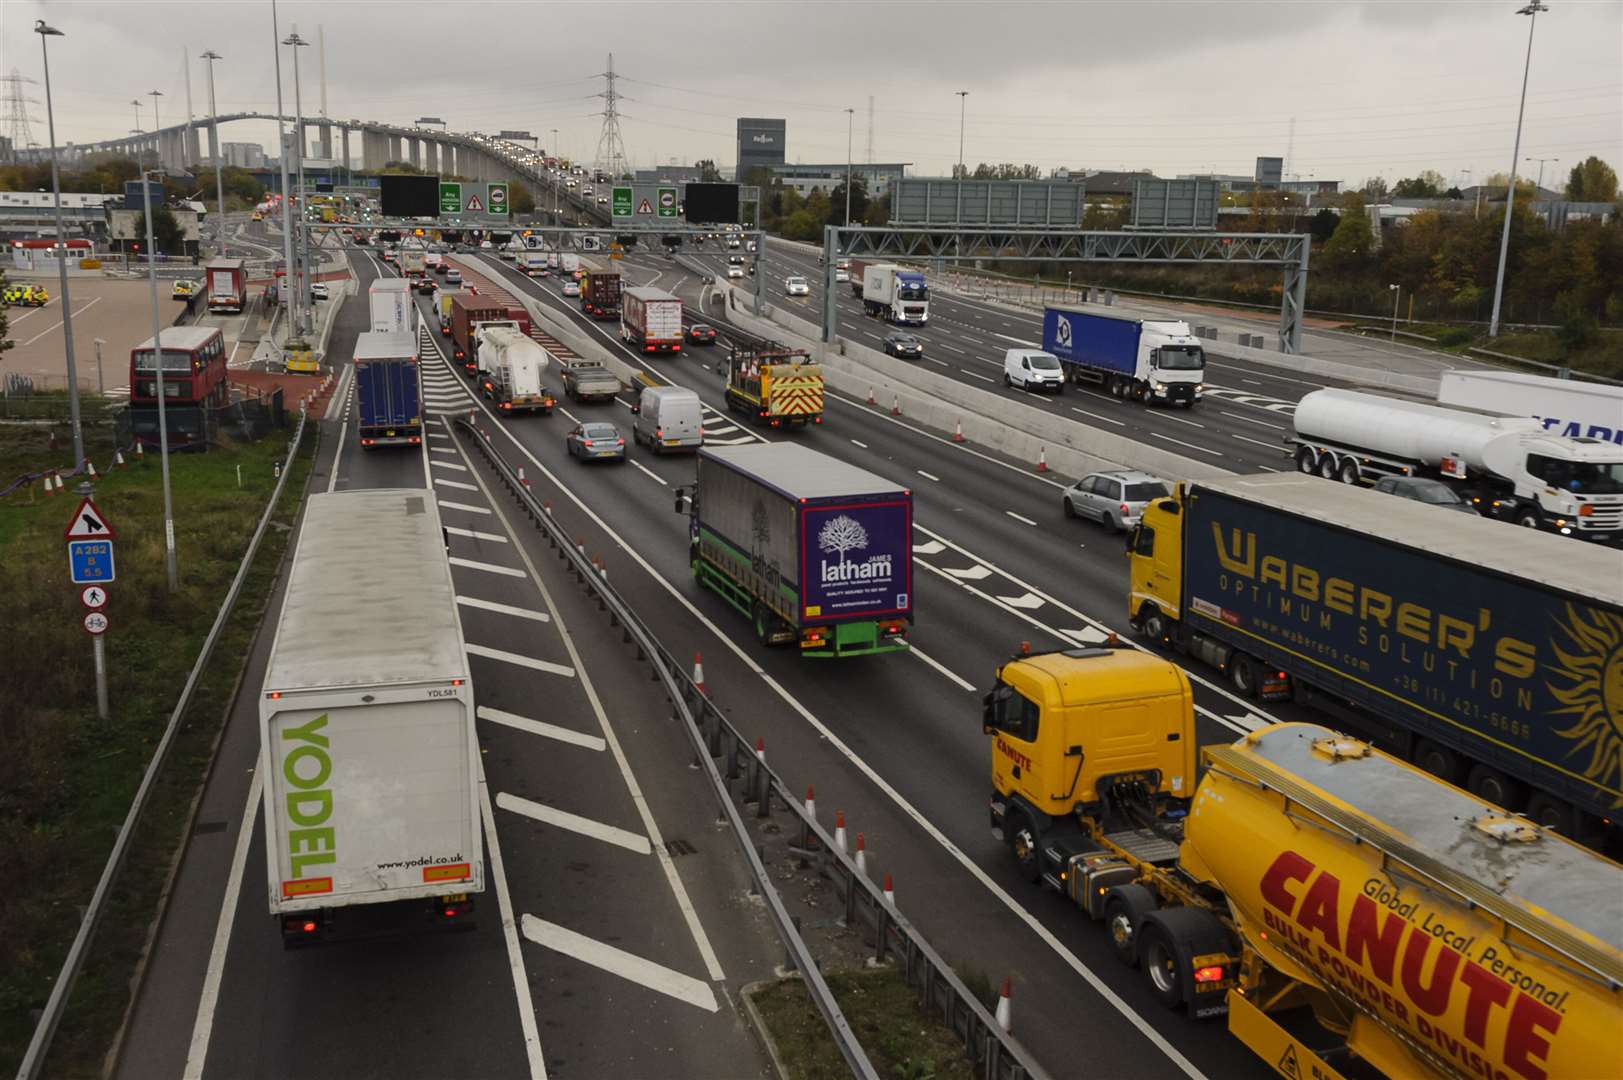 The Dartford Crossing is one of the worst offenders for emissions the council will seek to address